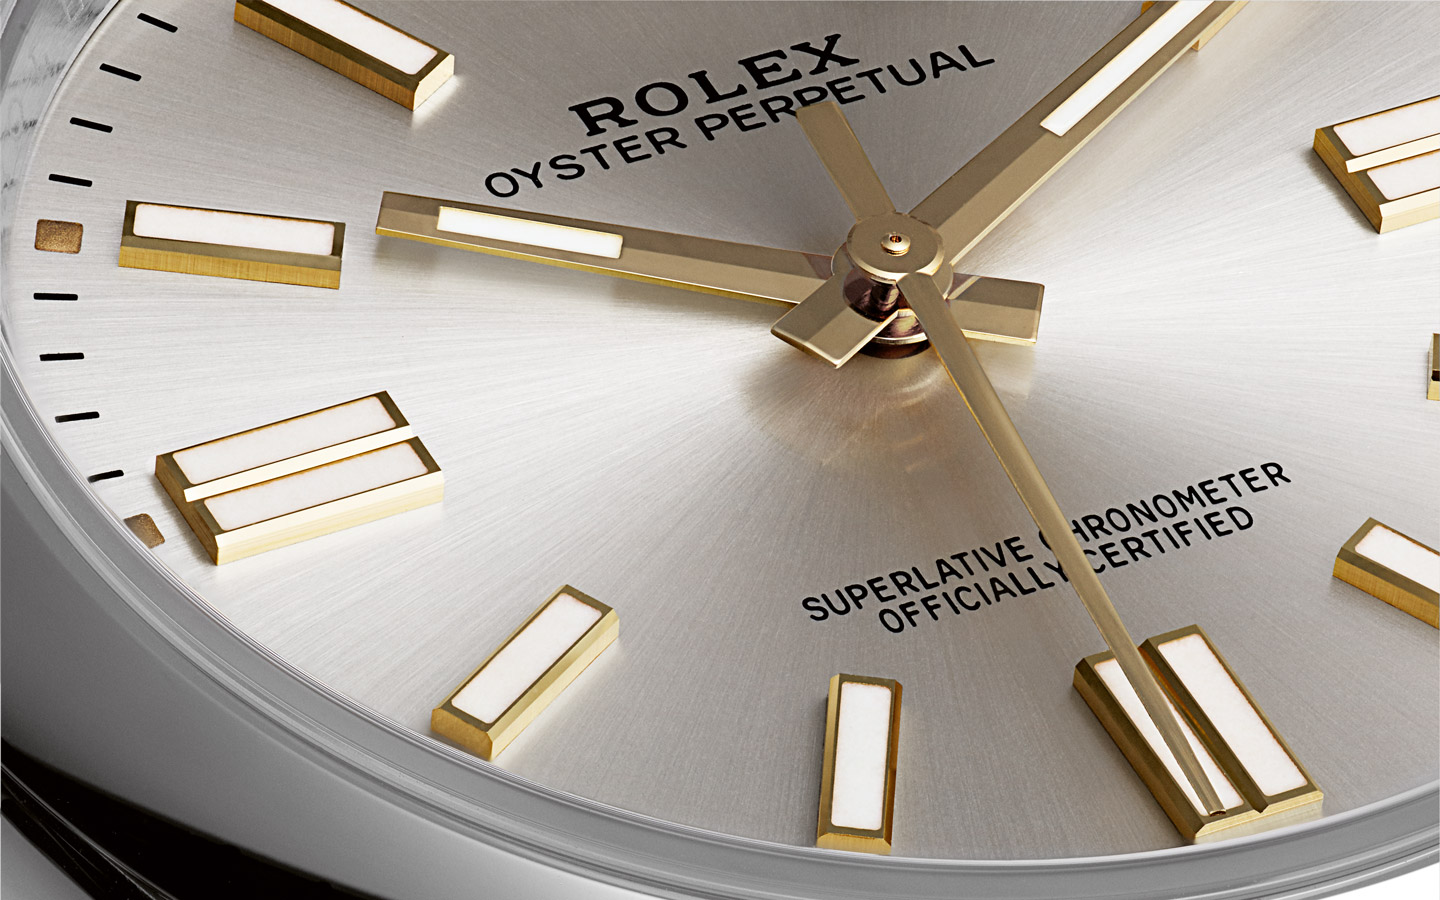 Rolex Oyster Perpetual watch at Goldfinger SXM - Caribbean